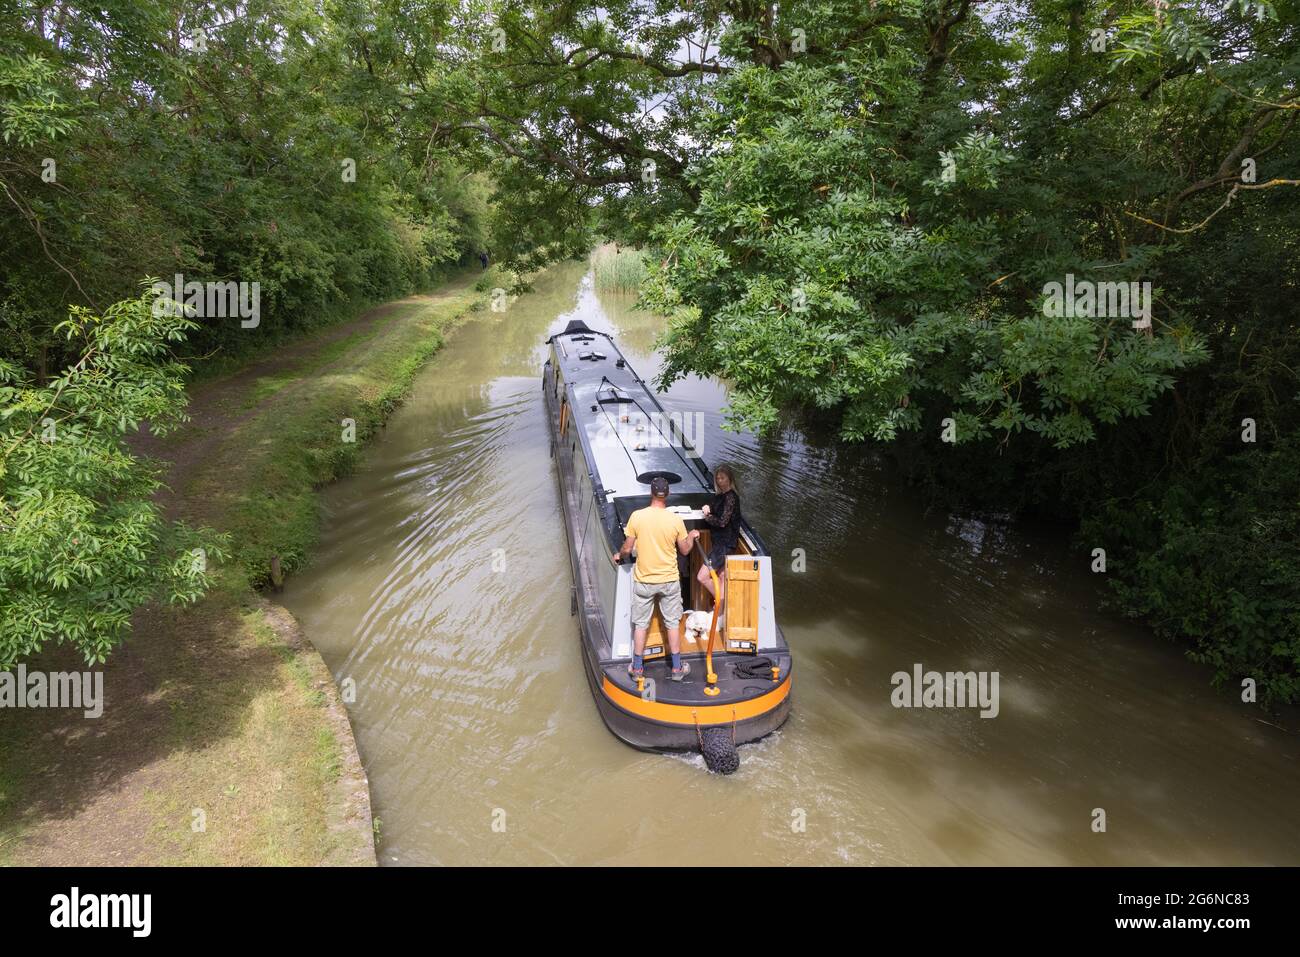 Crick, Northamptonshire, UK, July 7th 2021: A couple with a small dog at the stern of a narrowboat sail beneath trees along the Grand Union Canal. Stock Photo